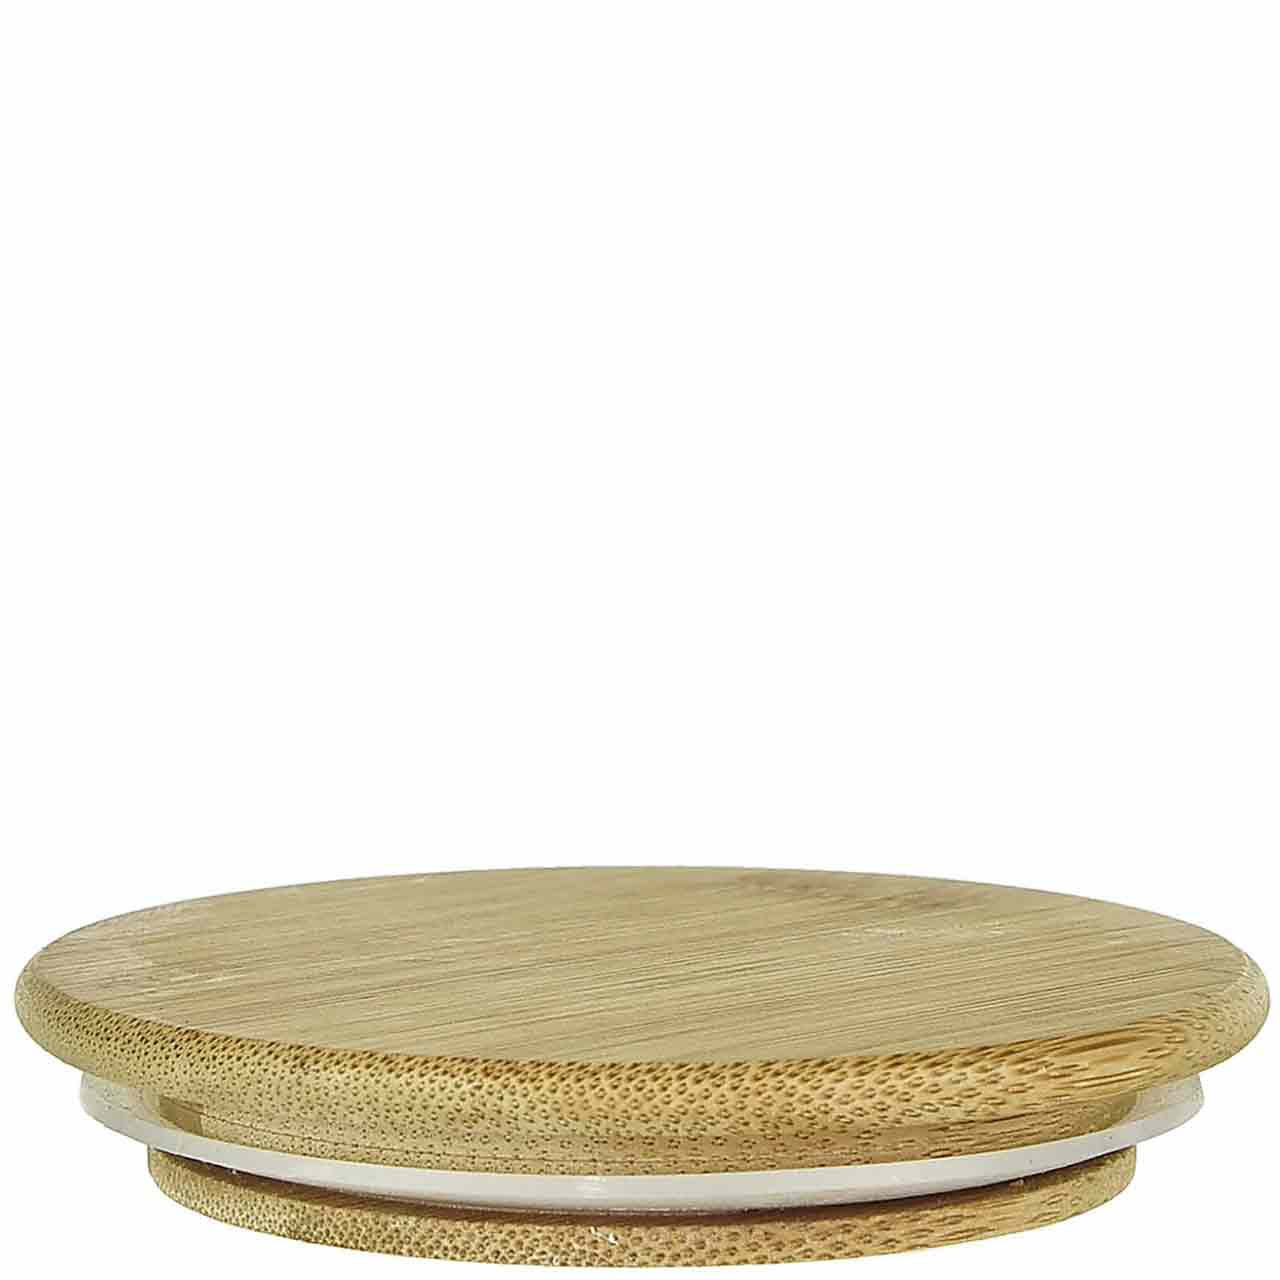 https://cdn11.bigcommerce.com/s-uzavep2g8k/images/stencil/1280x1280/products/274/4144/SCB090-Bamboo-Lid-For-7596__38309.1703718254.jpg?c=1